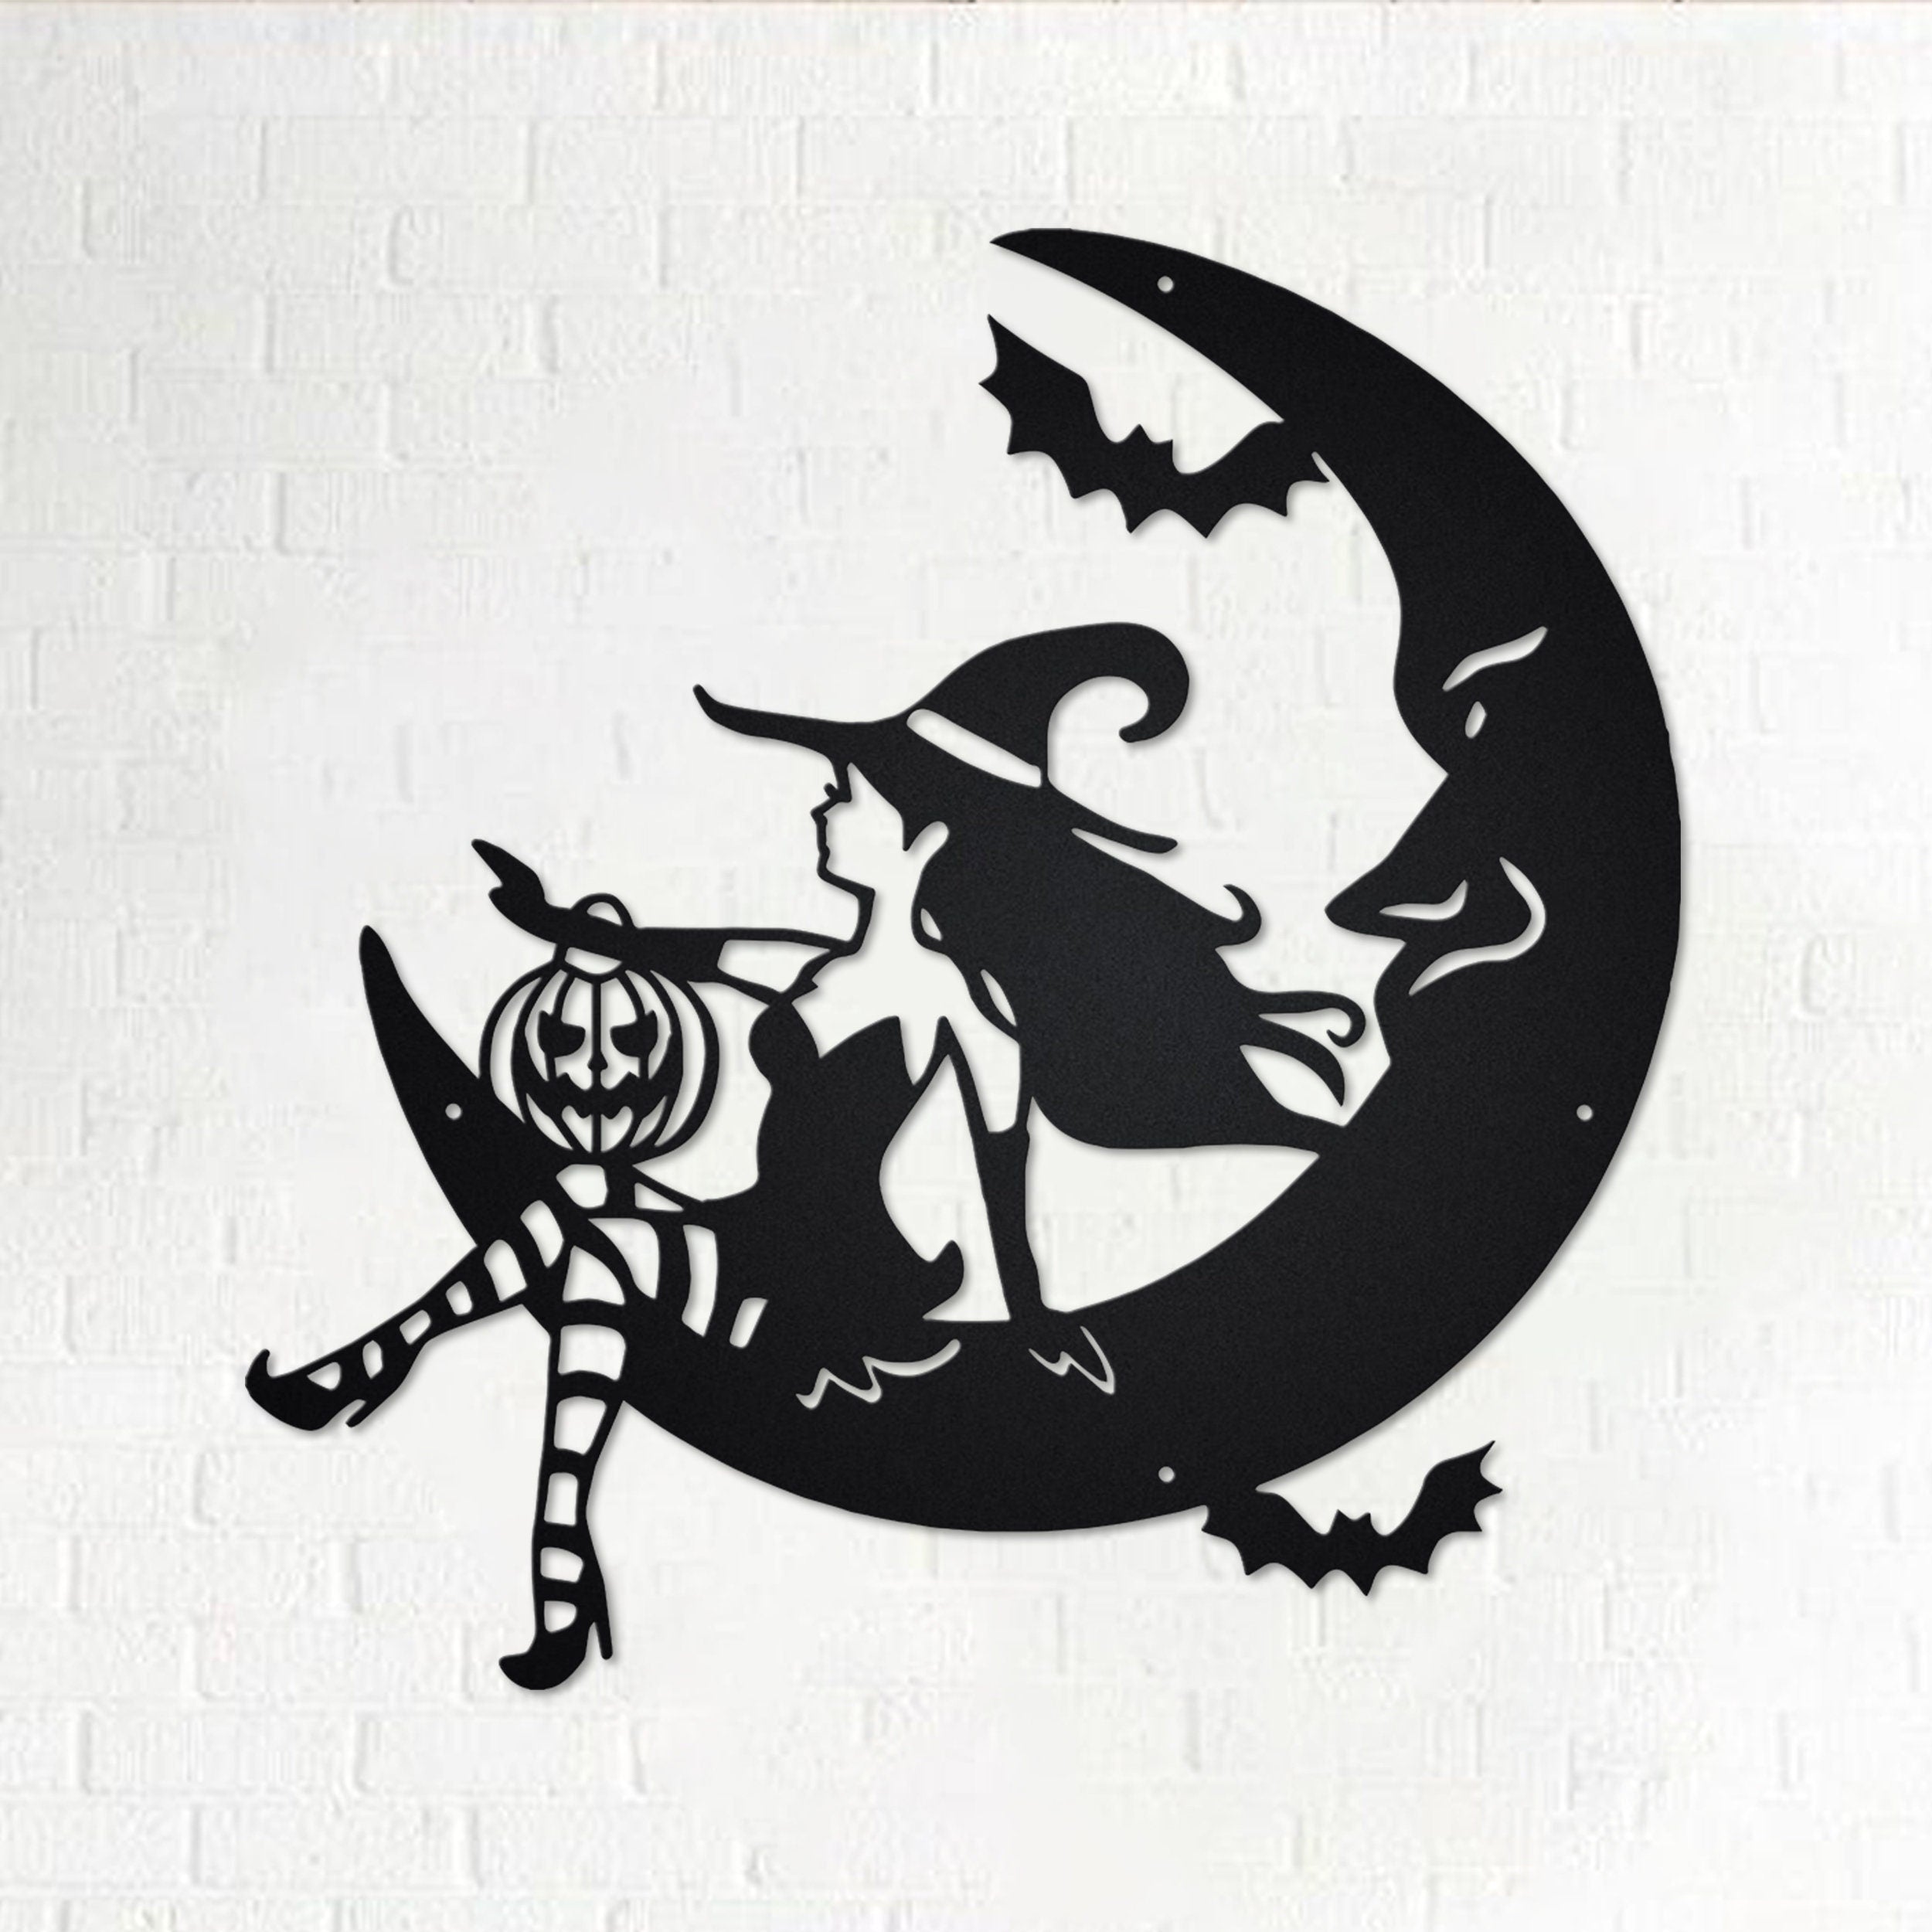 Halloween Witch Moon Metal Sign, Witch Moon Metal Wall Art, Witch Moon Tree Metal Wall Decor, Halloween Metal Decor, Halloween Decor